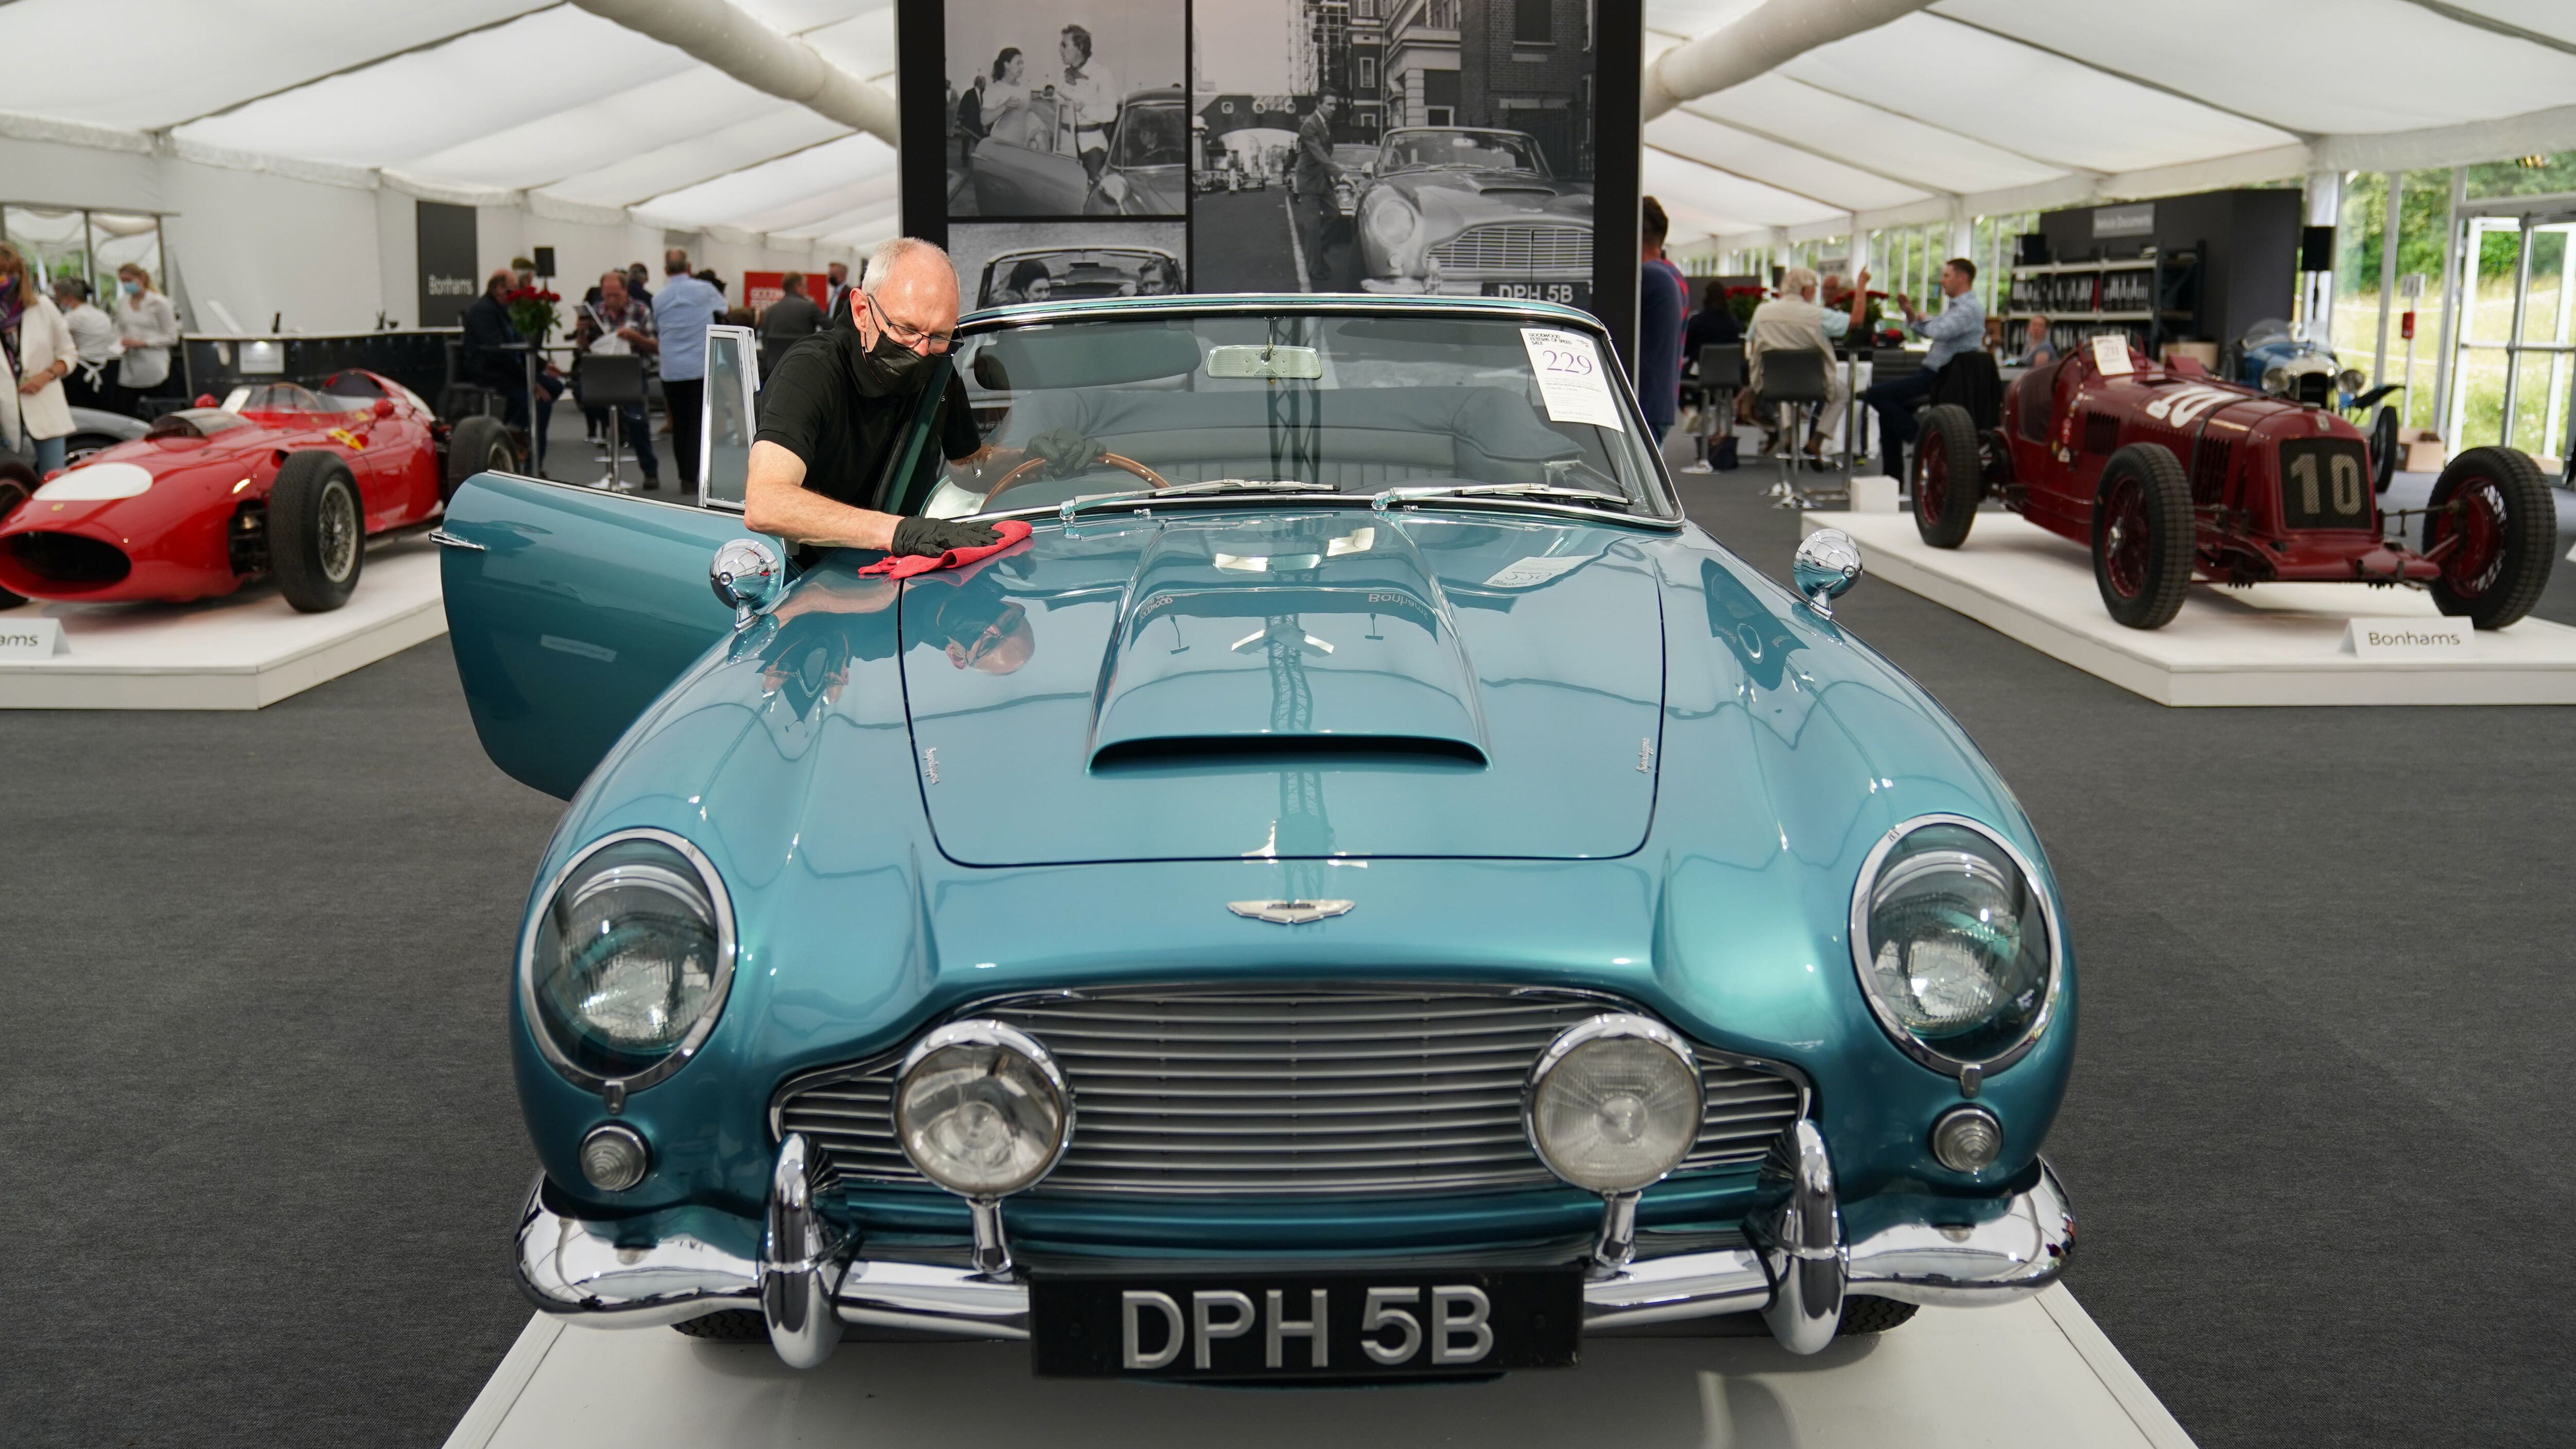 The 1964 DB5 convertible, which has carried a bevy of high society stars, could fetch up to £1.7m.